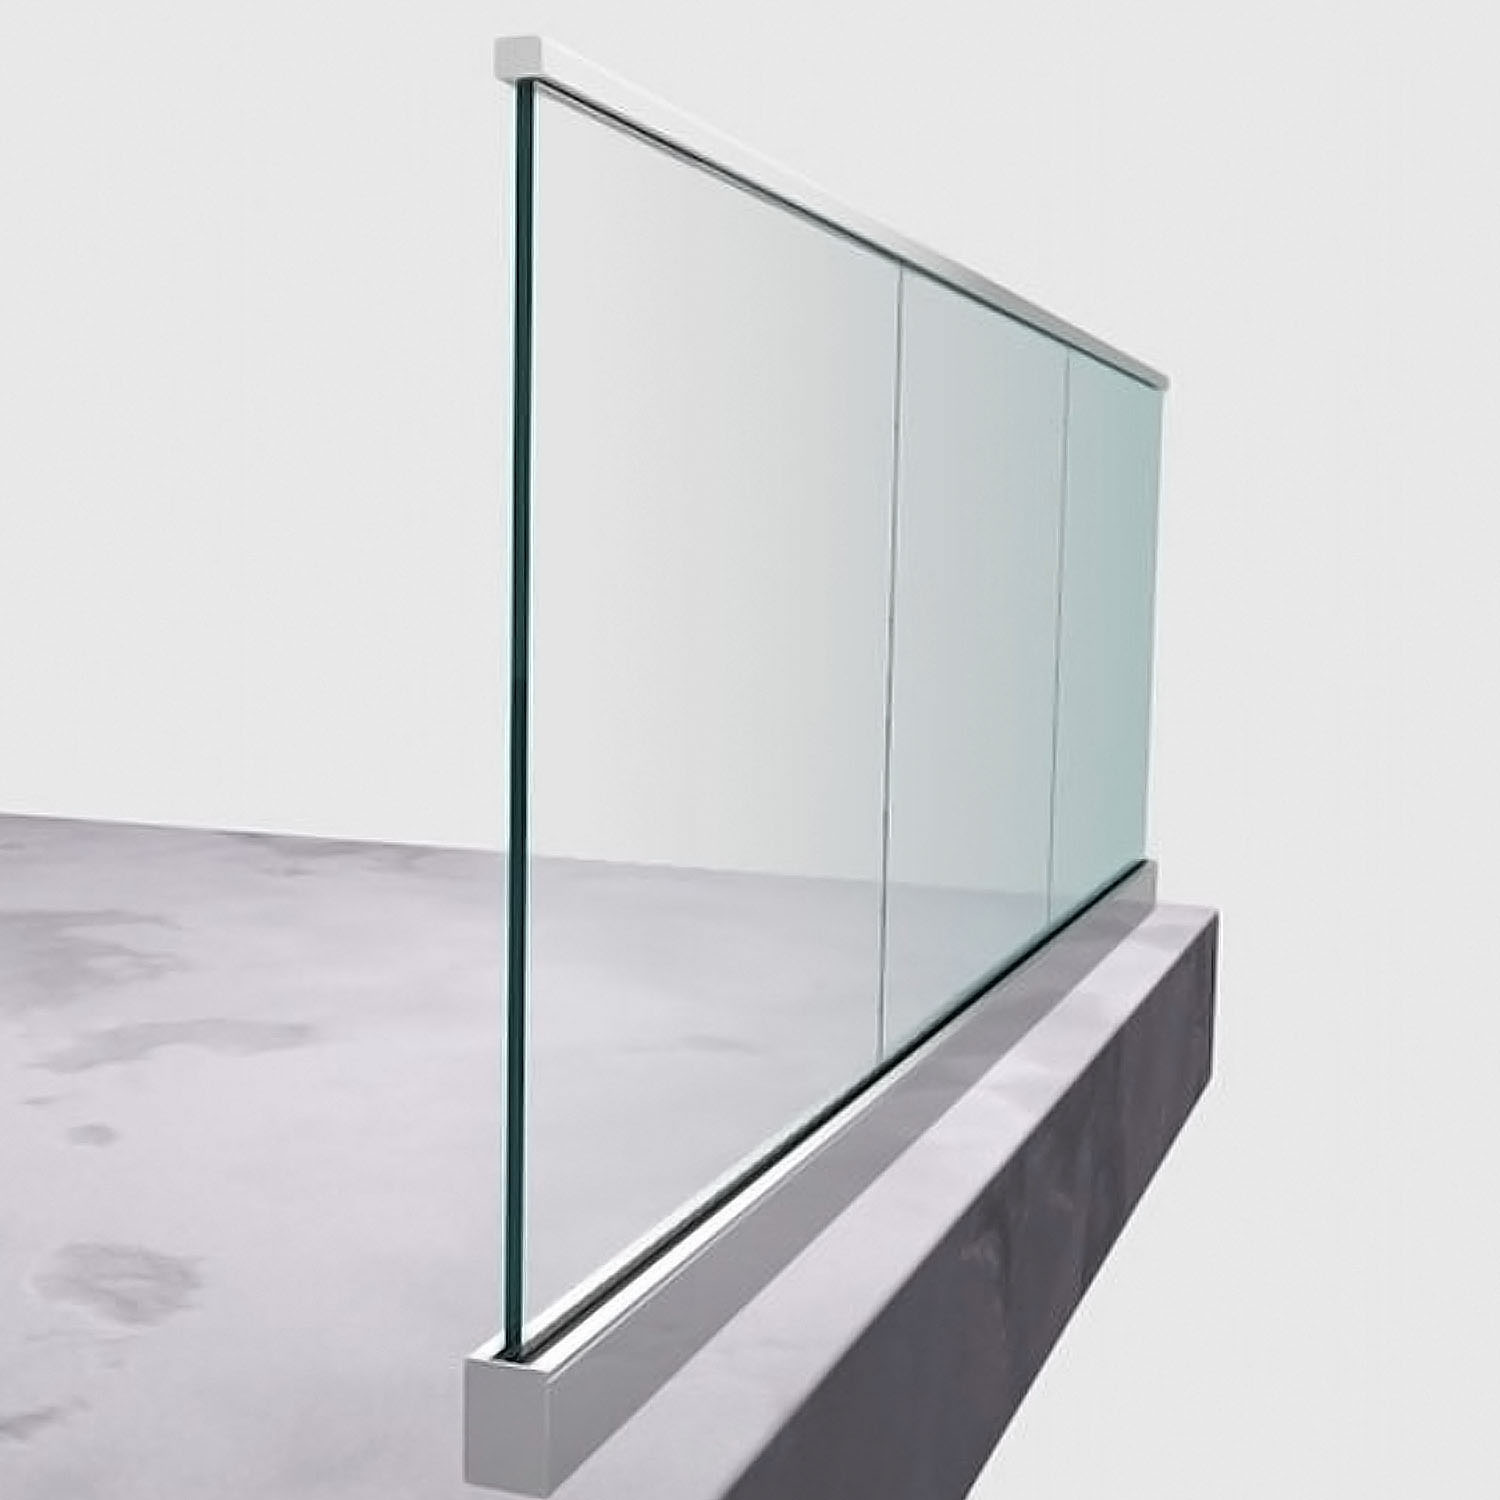 Glass fence with square slot tube